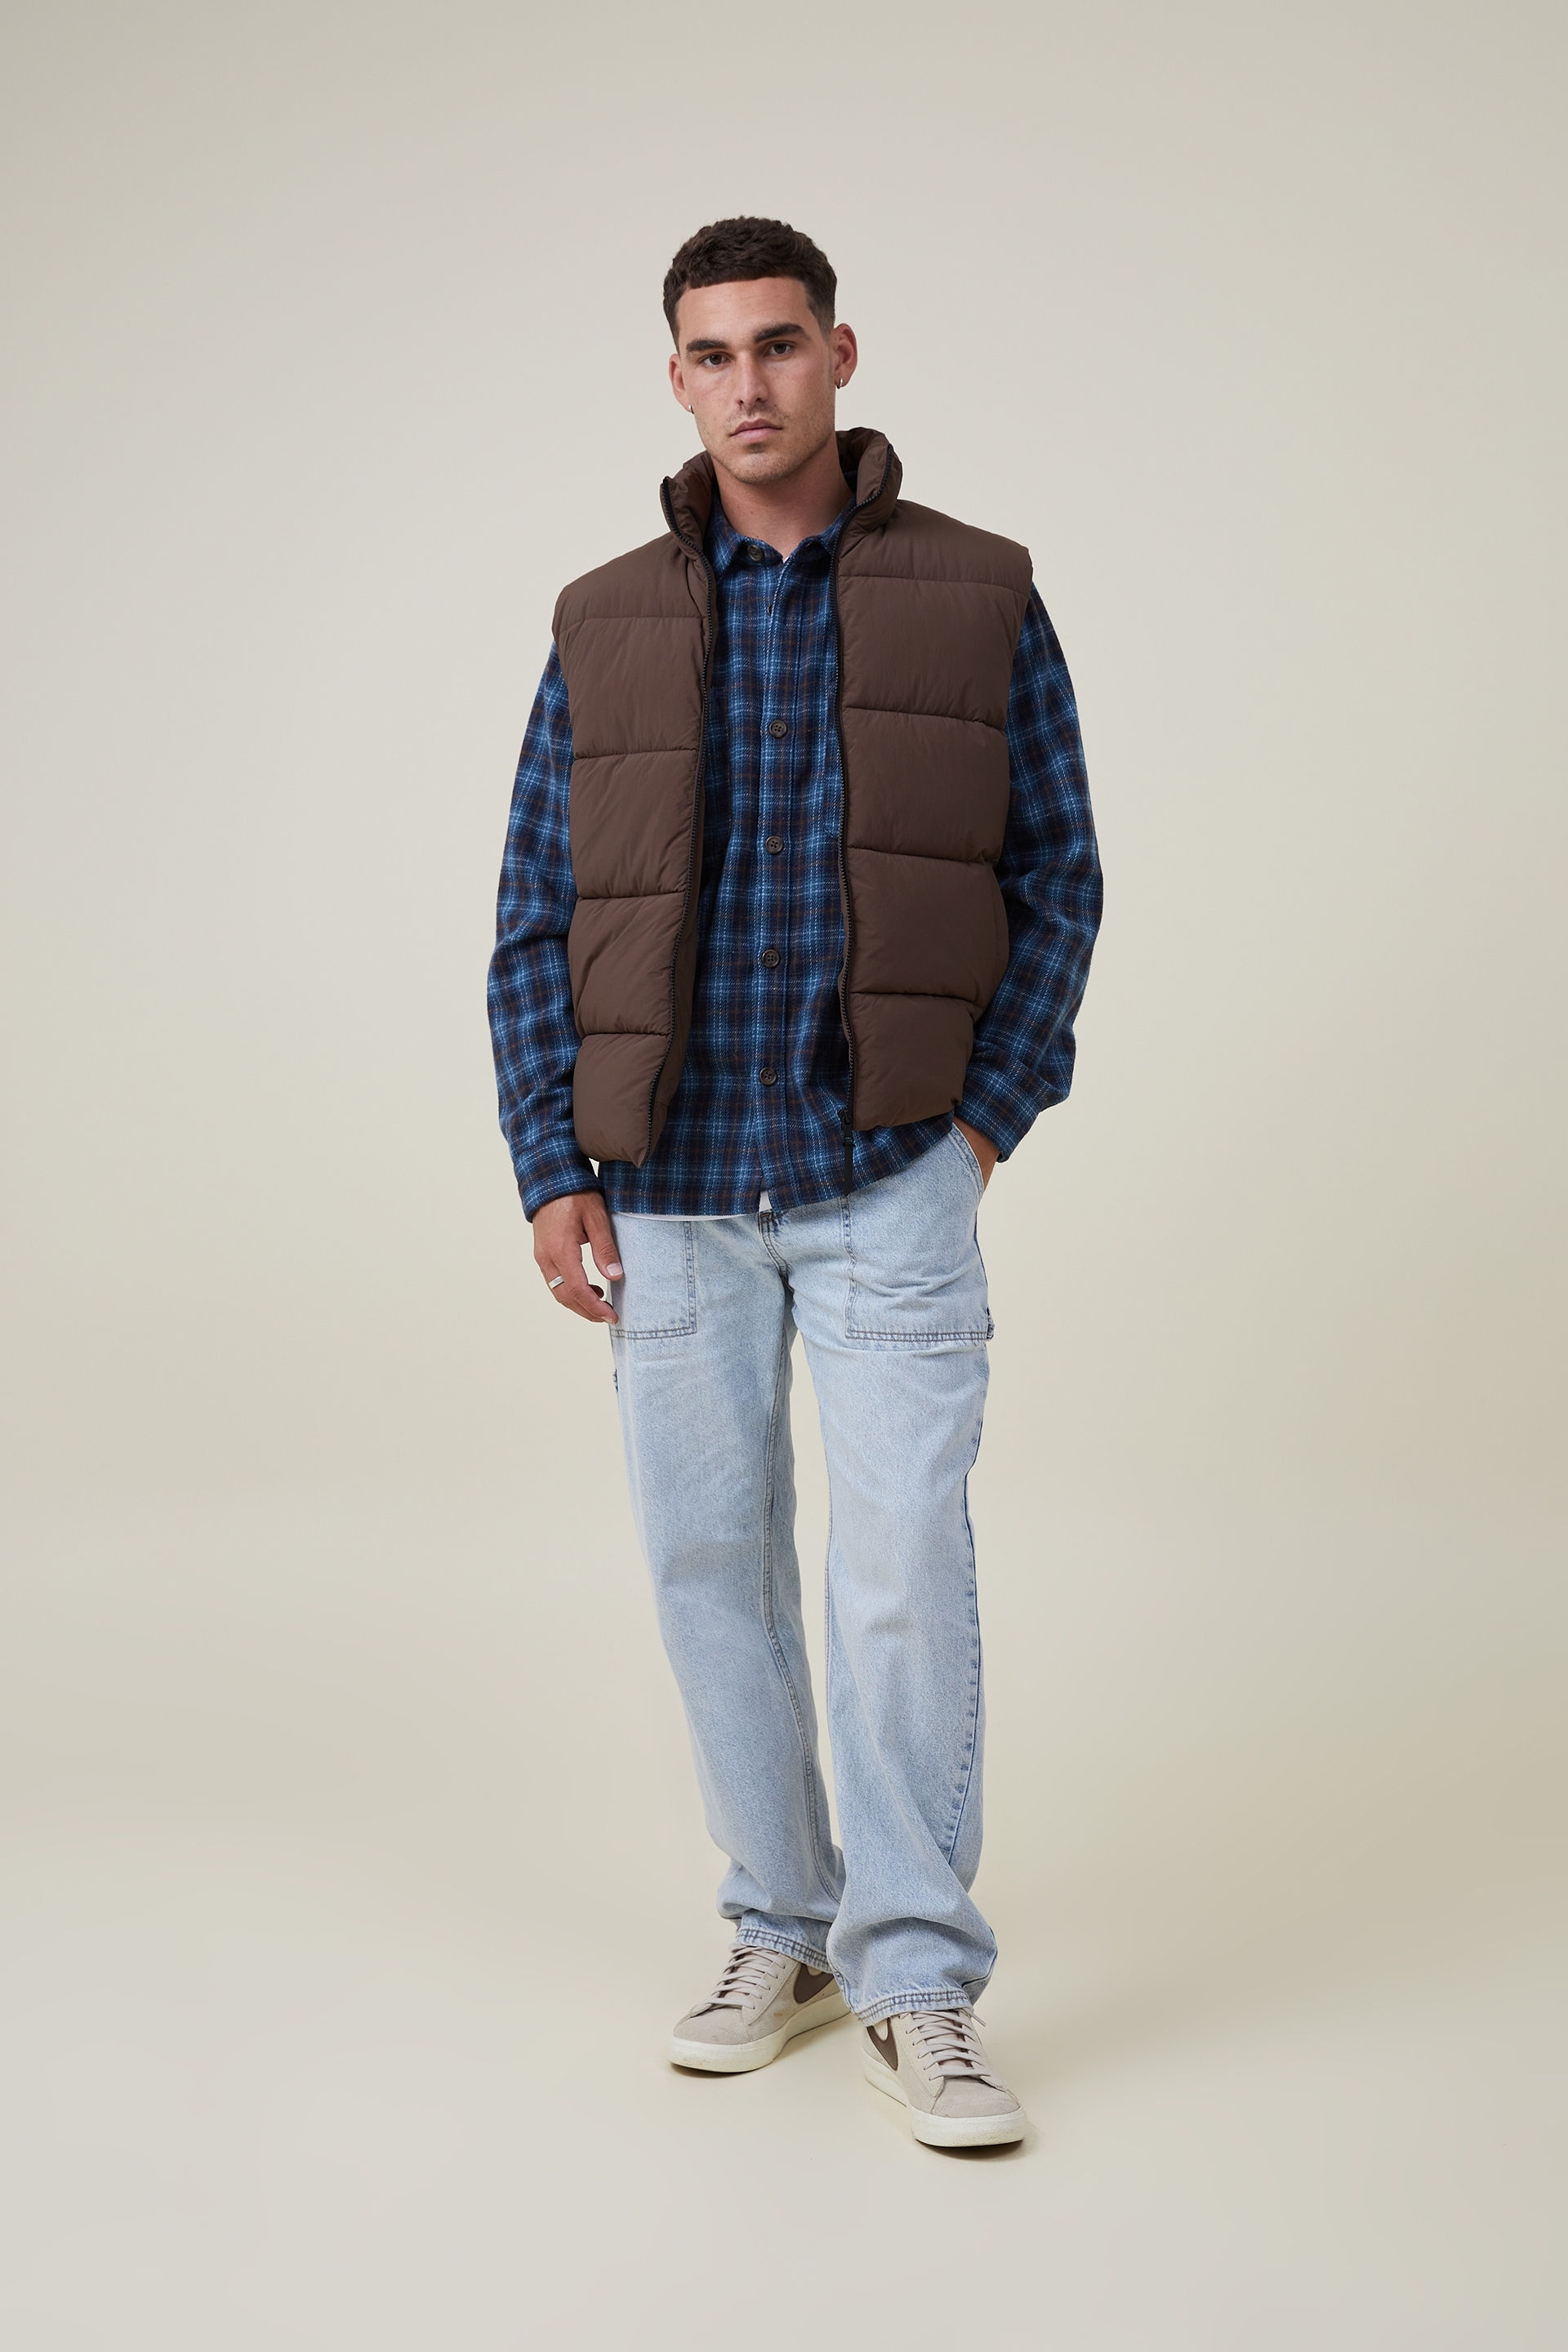 Cotton On Men - Recycled Puffer Vest - Chocolate